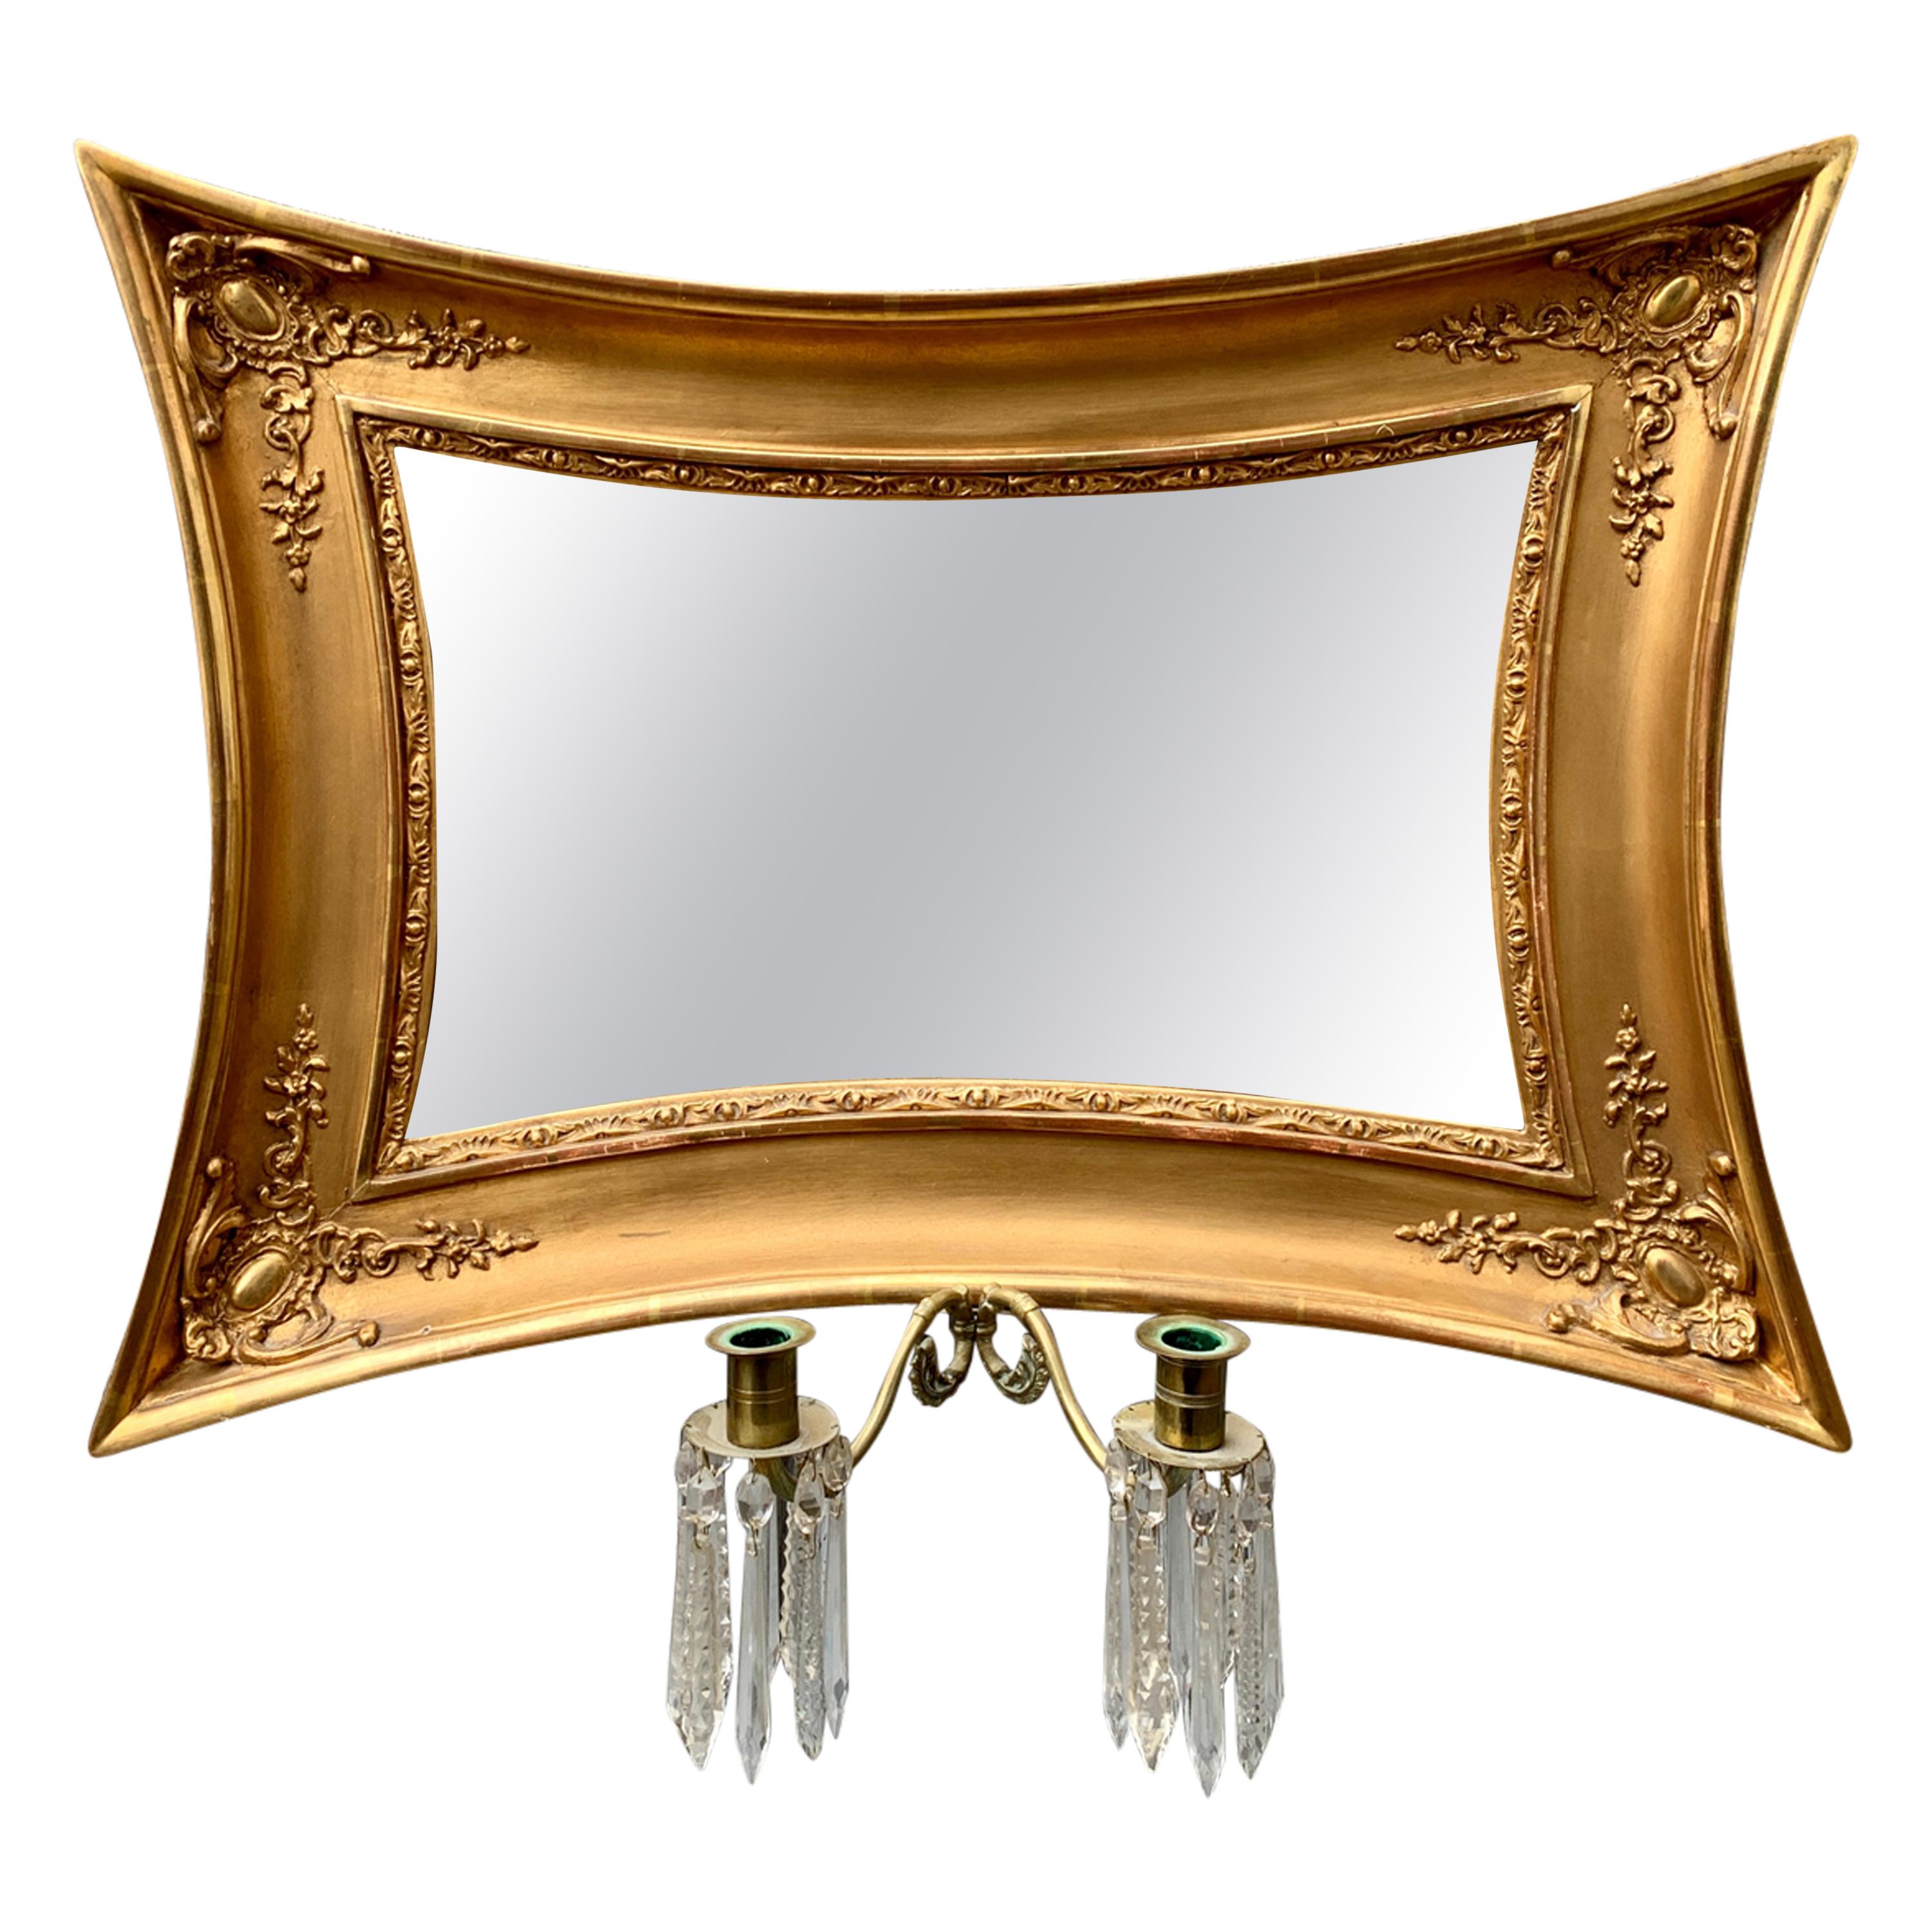 Scandinavian Empire Giltwood Concave Sided Sconce Mirror For Sale